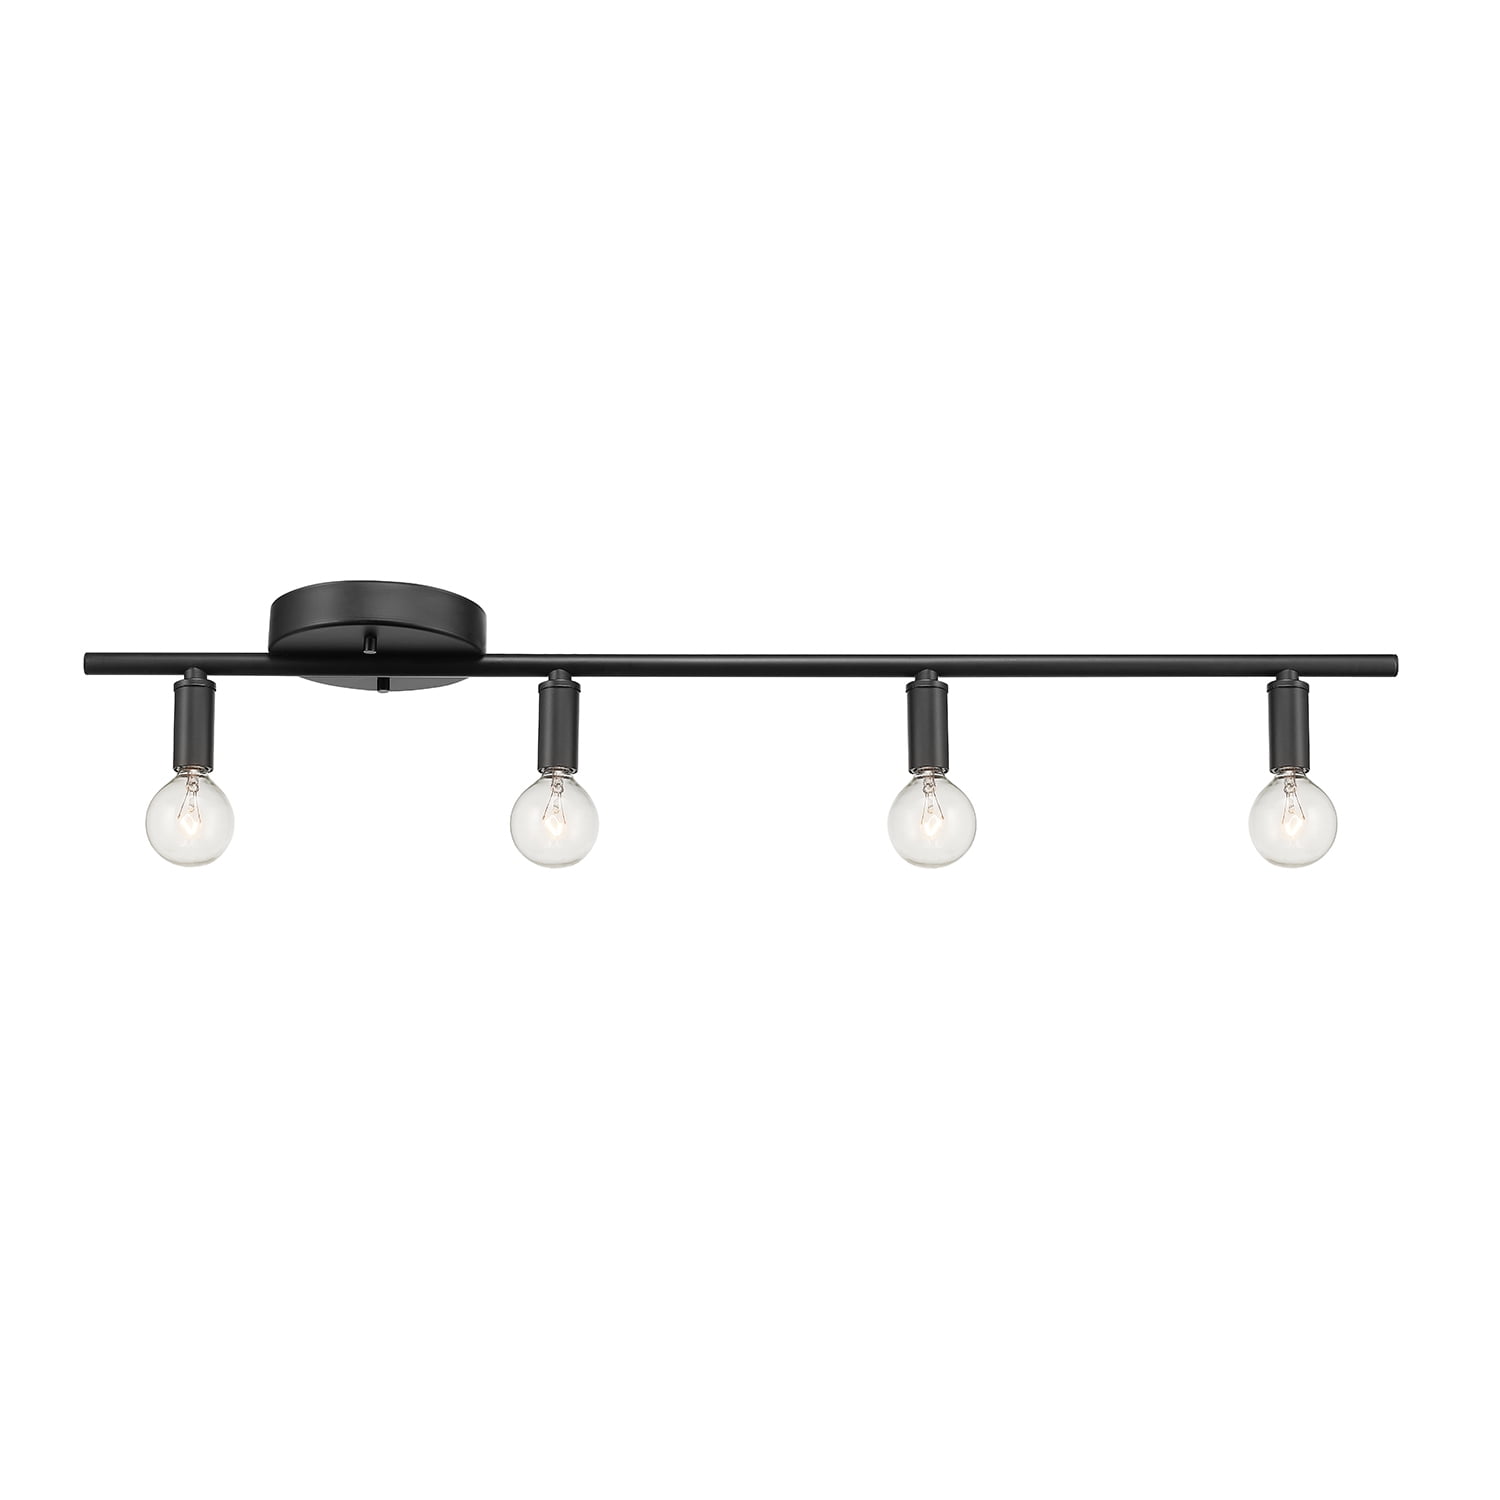 4 Light Track Lighting Ceiling Wall Interior Lamp Fixture Oil Rubbed Bronze 